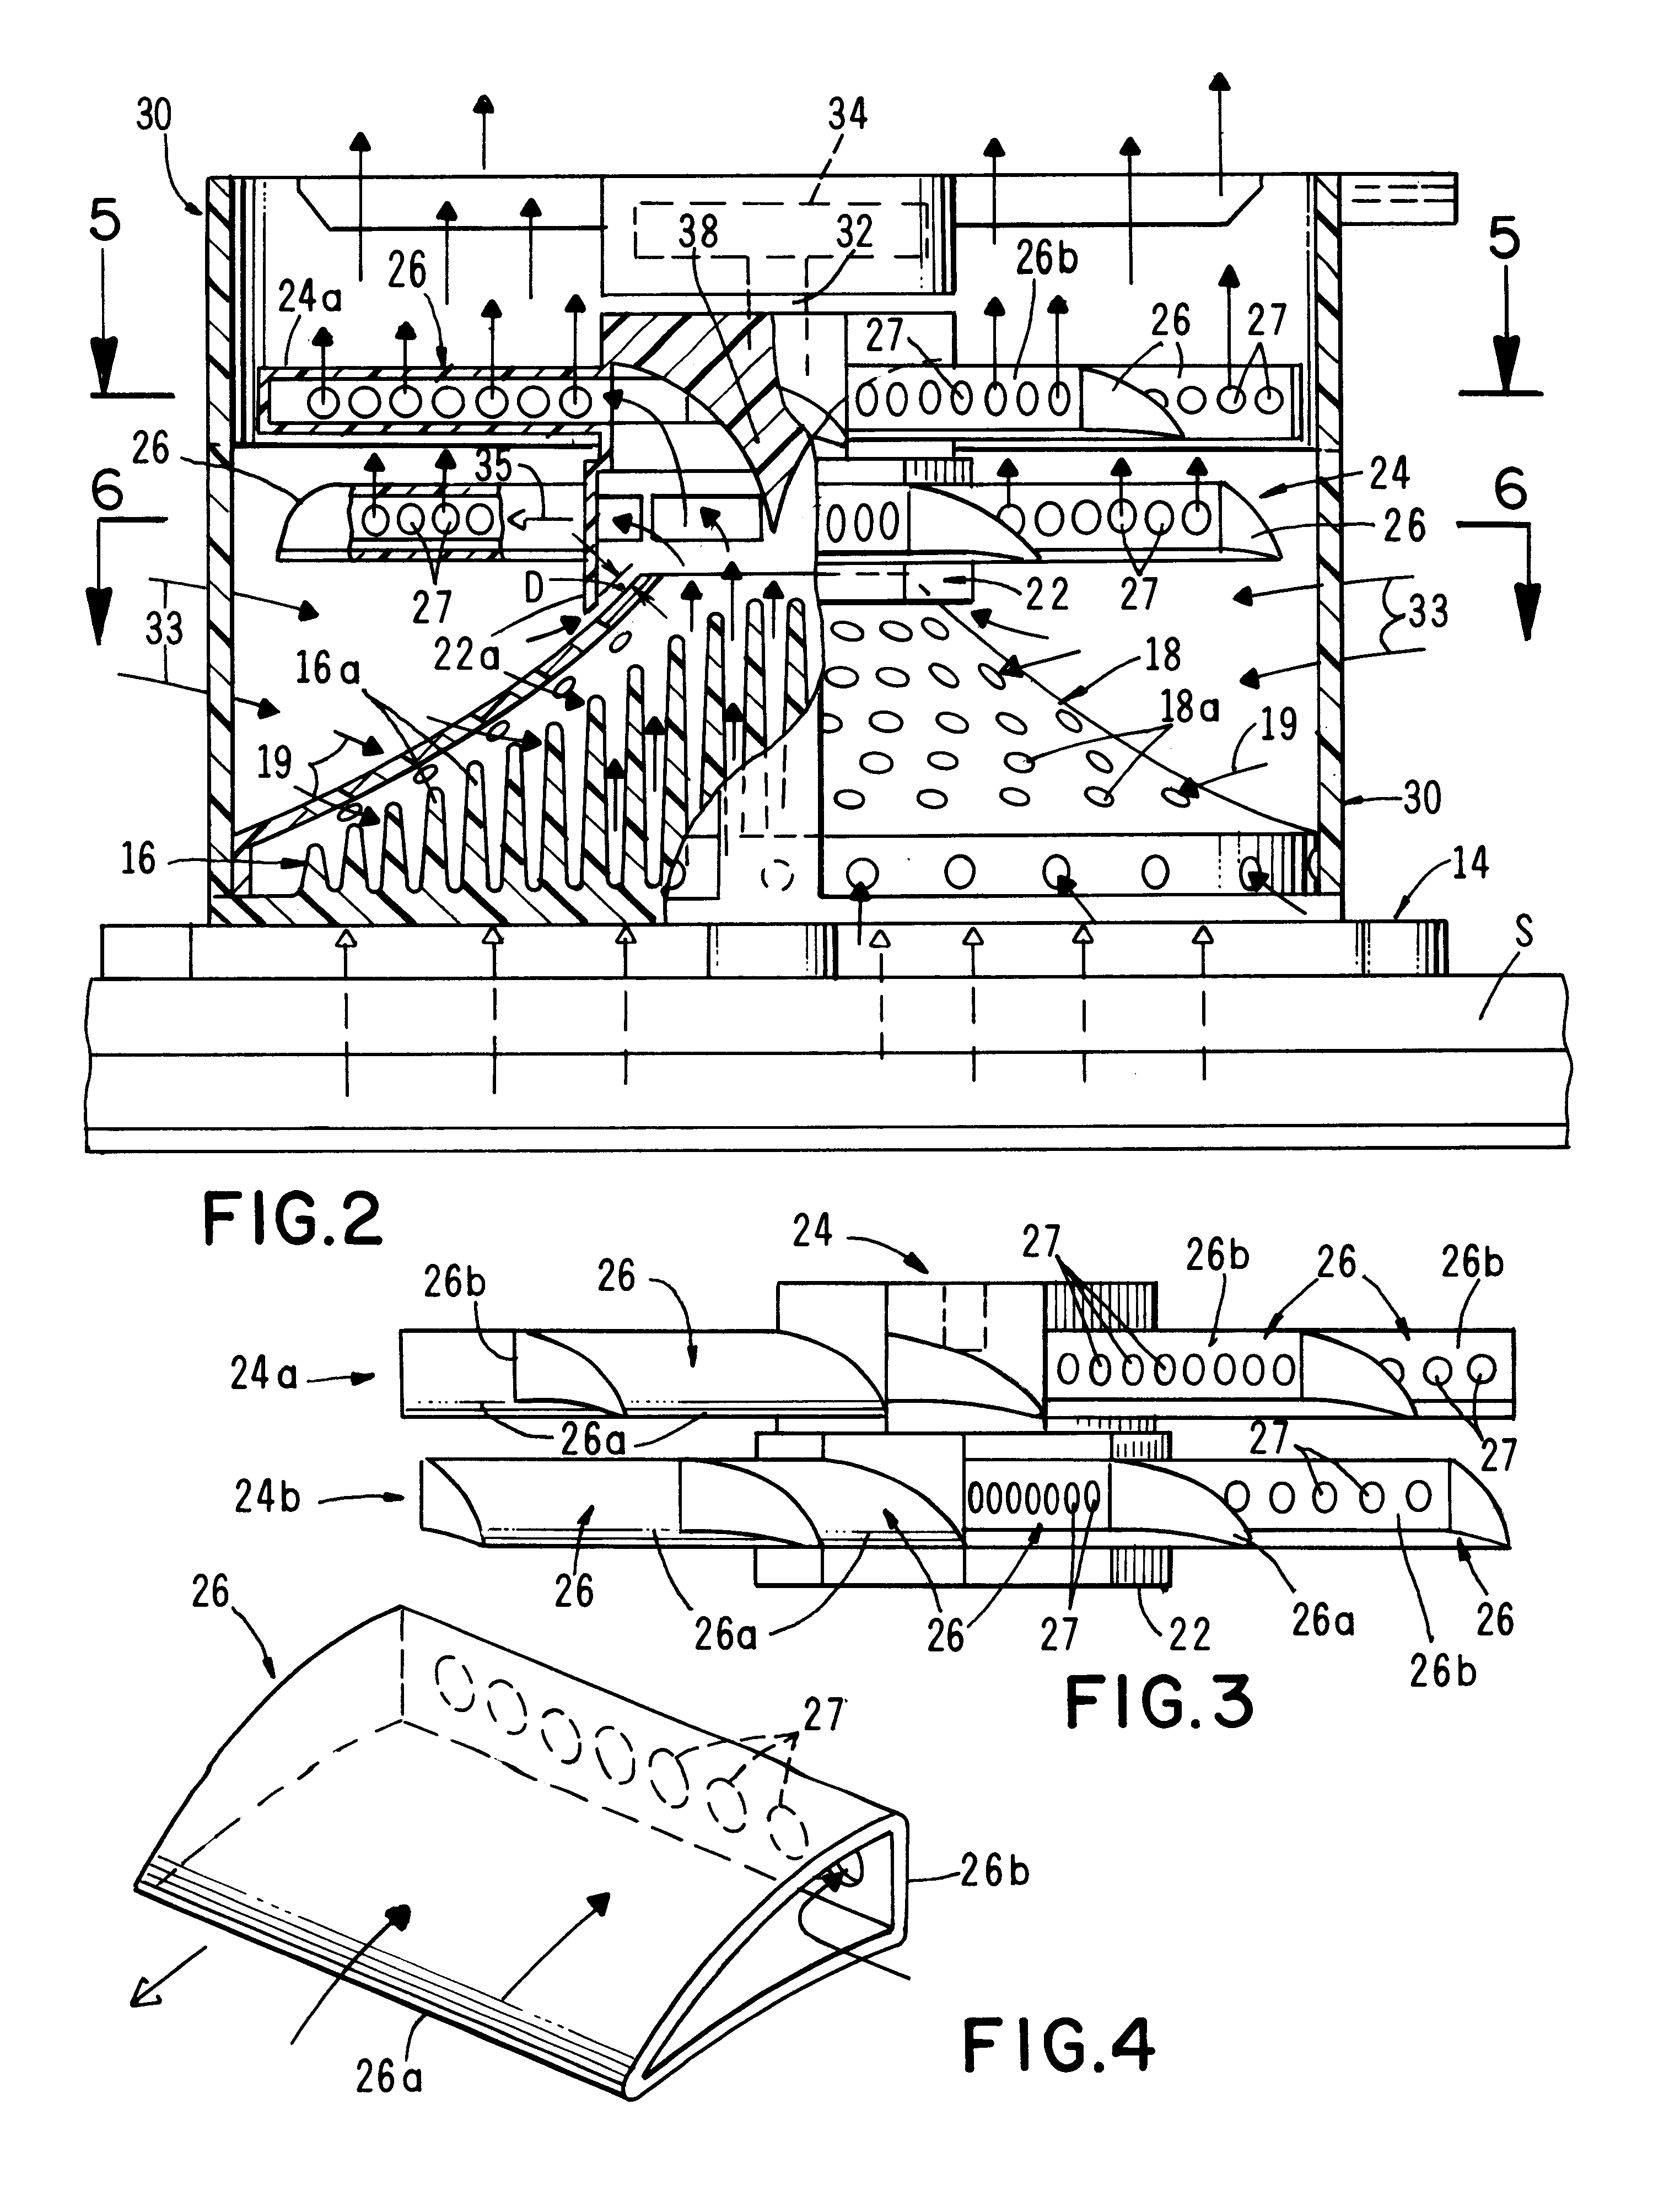 Apparatus for cooling a heat producing member